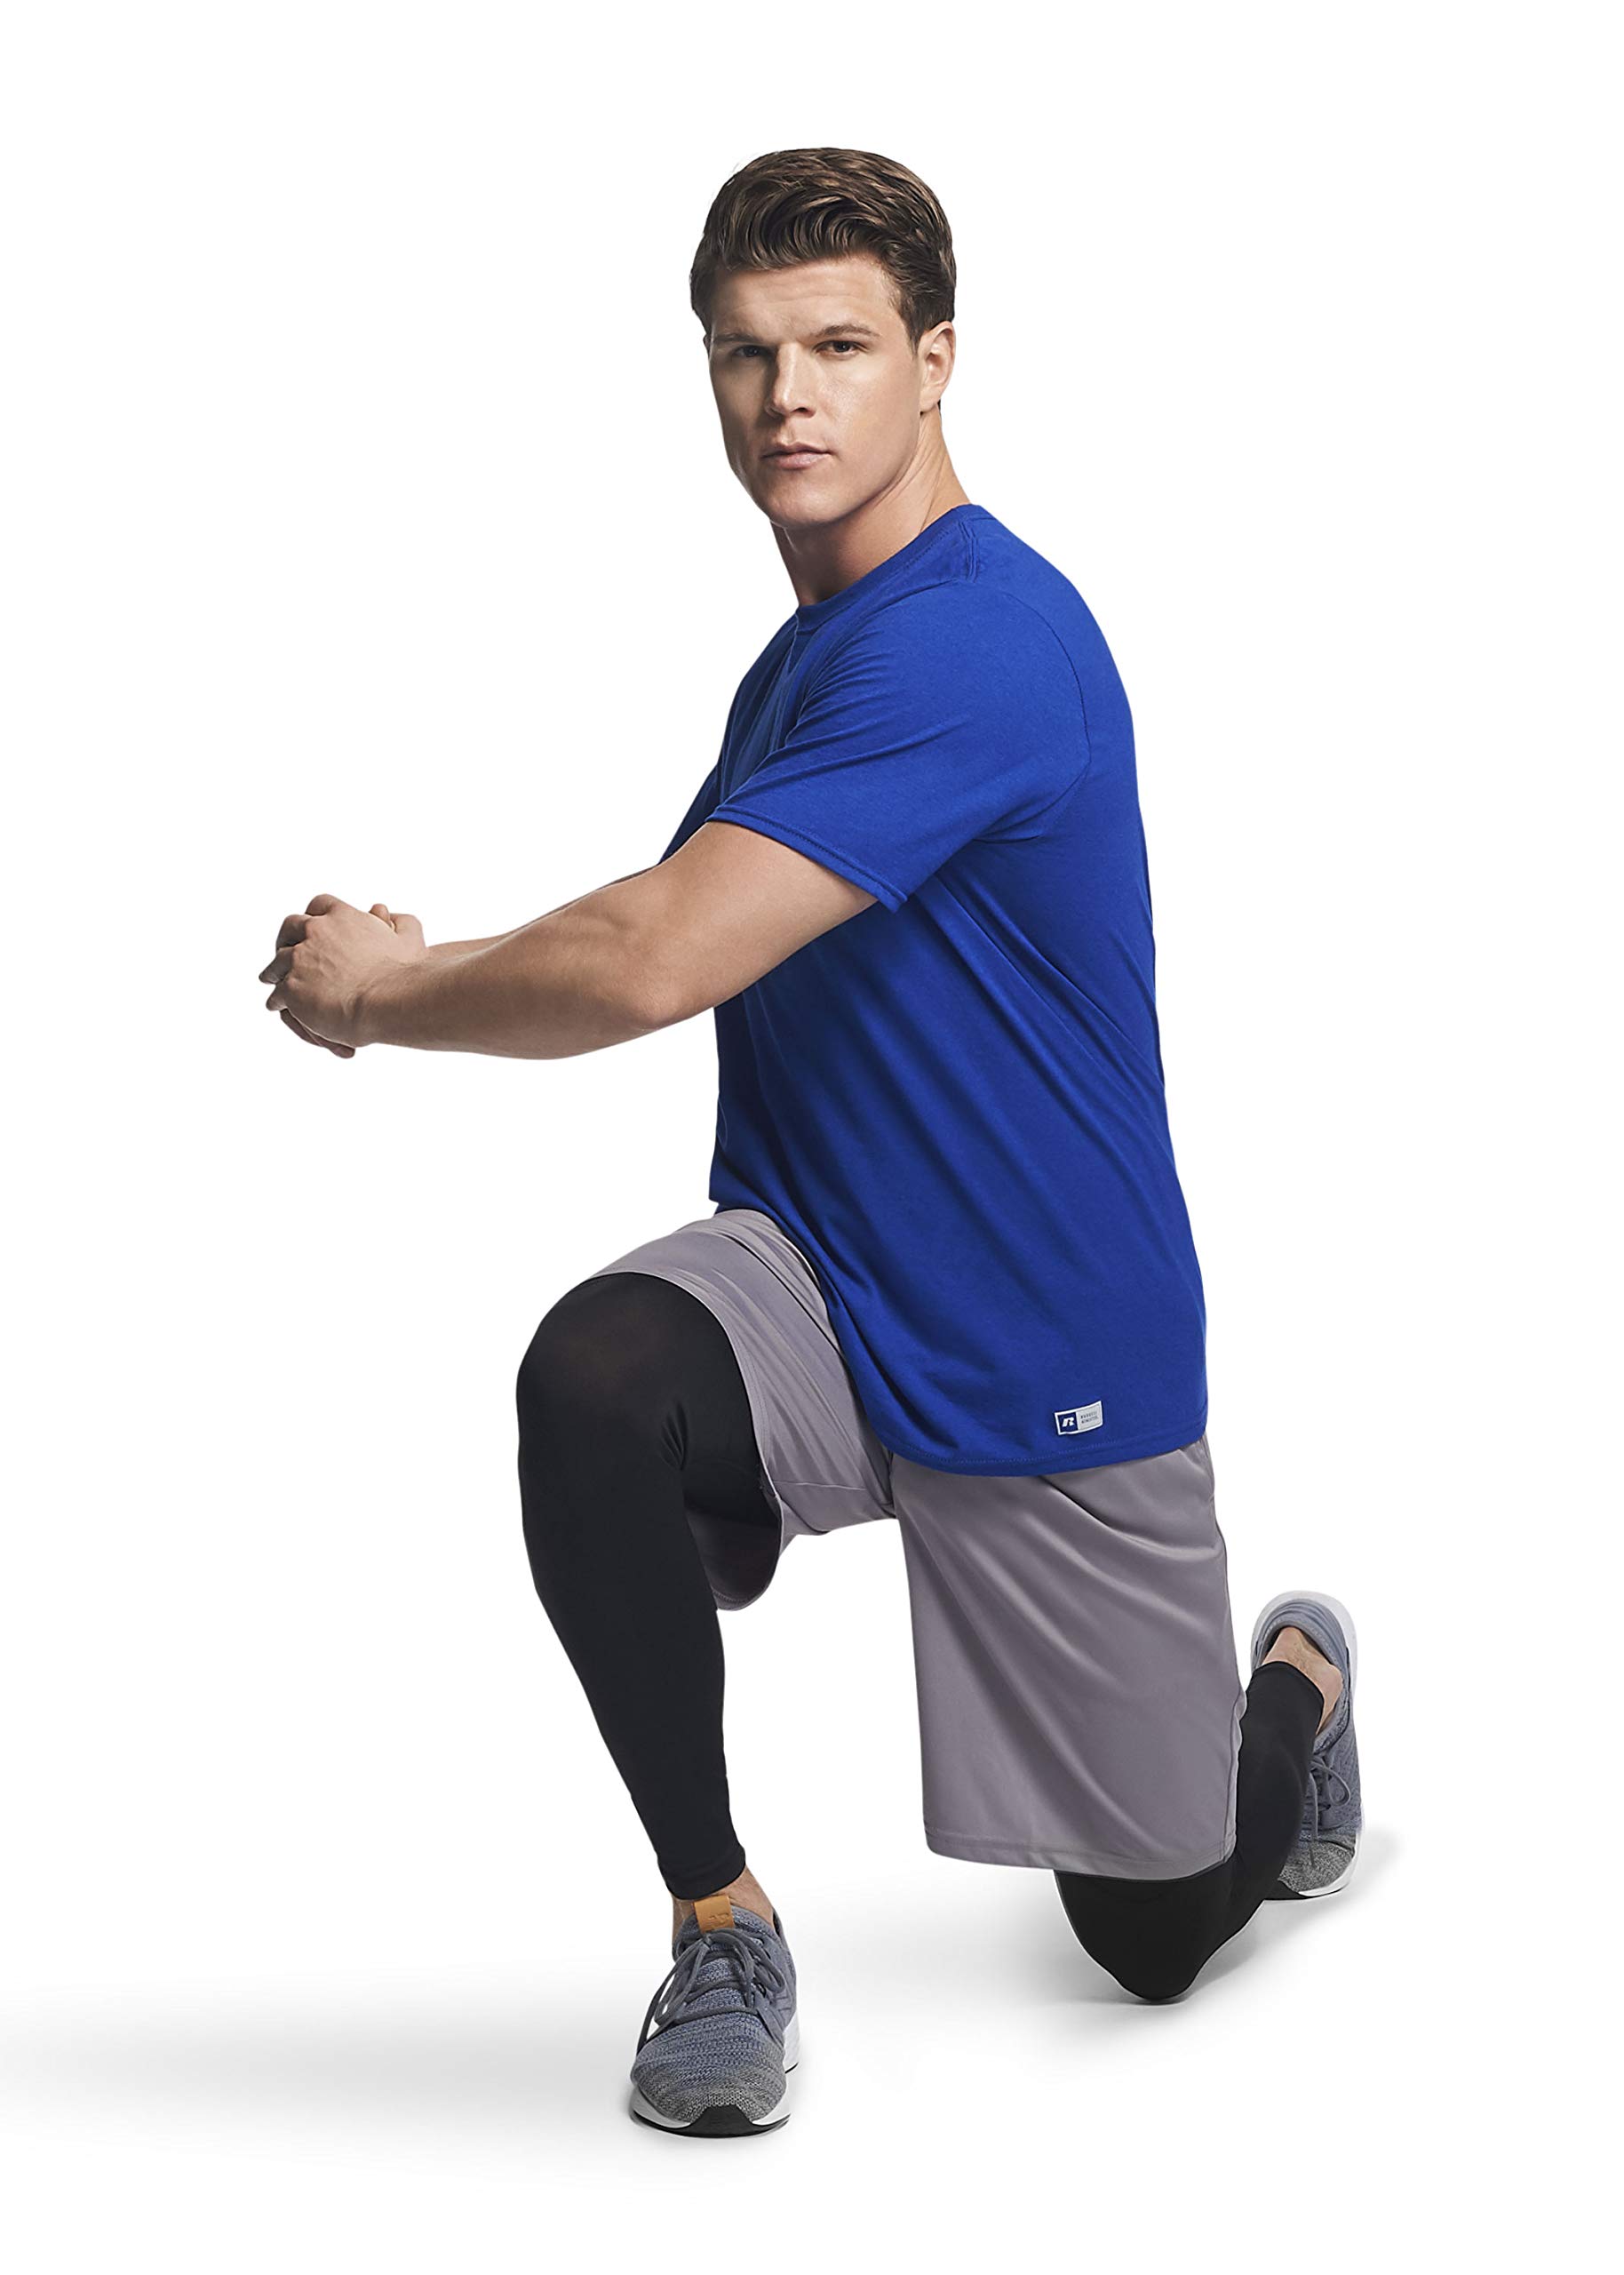 Russell Athletic Men's Dri-Power Cotton Blend Tees & Tanks, Moisture Wicking, Odor Protection, UPF 30+, Sizes S-4X